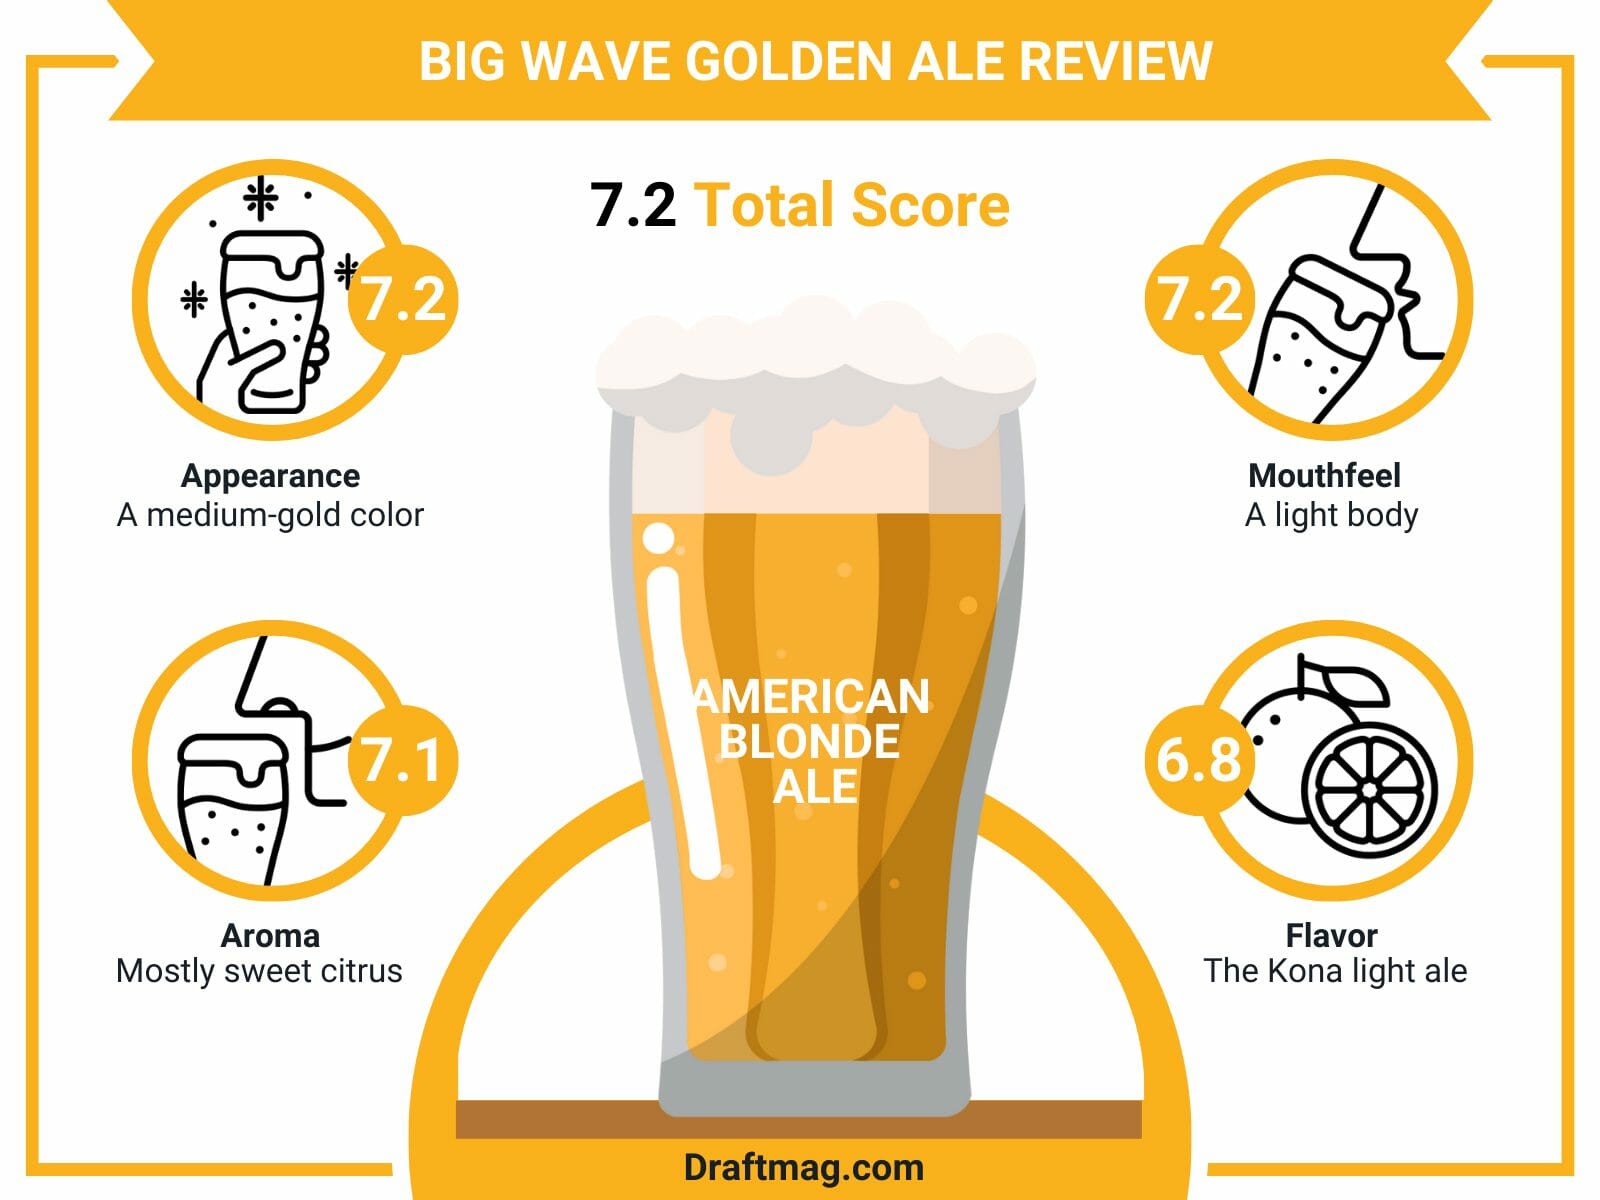 Big wave golden ale review infographic